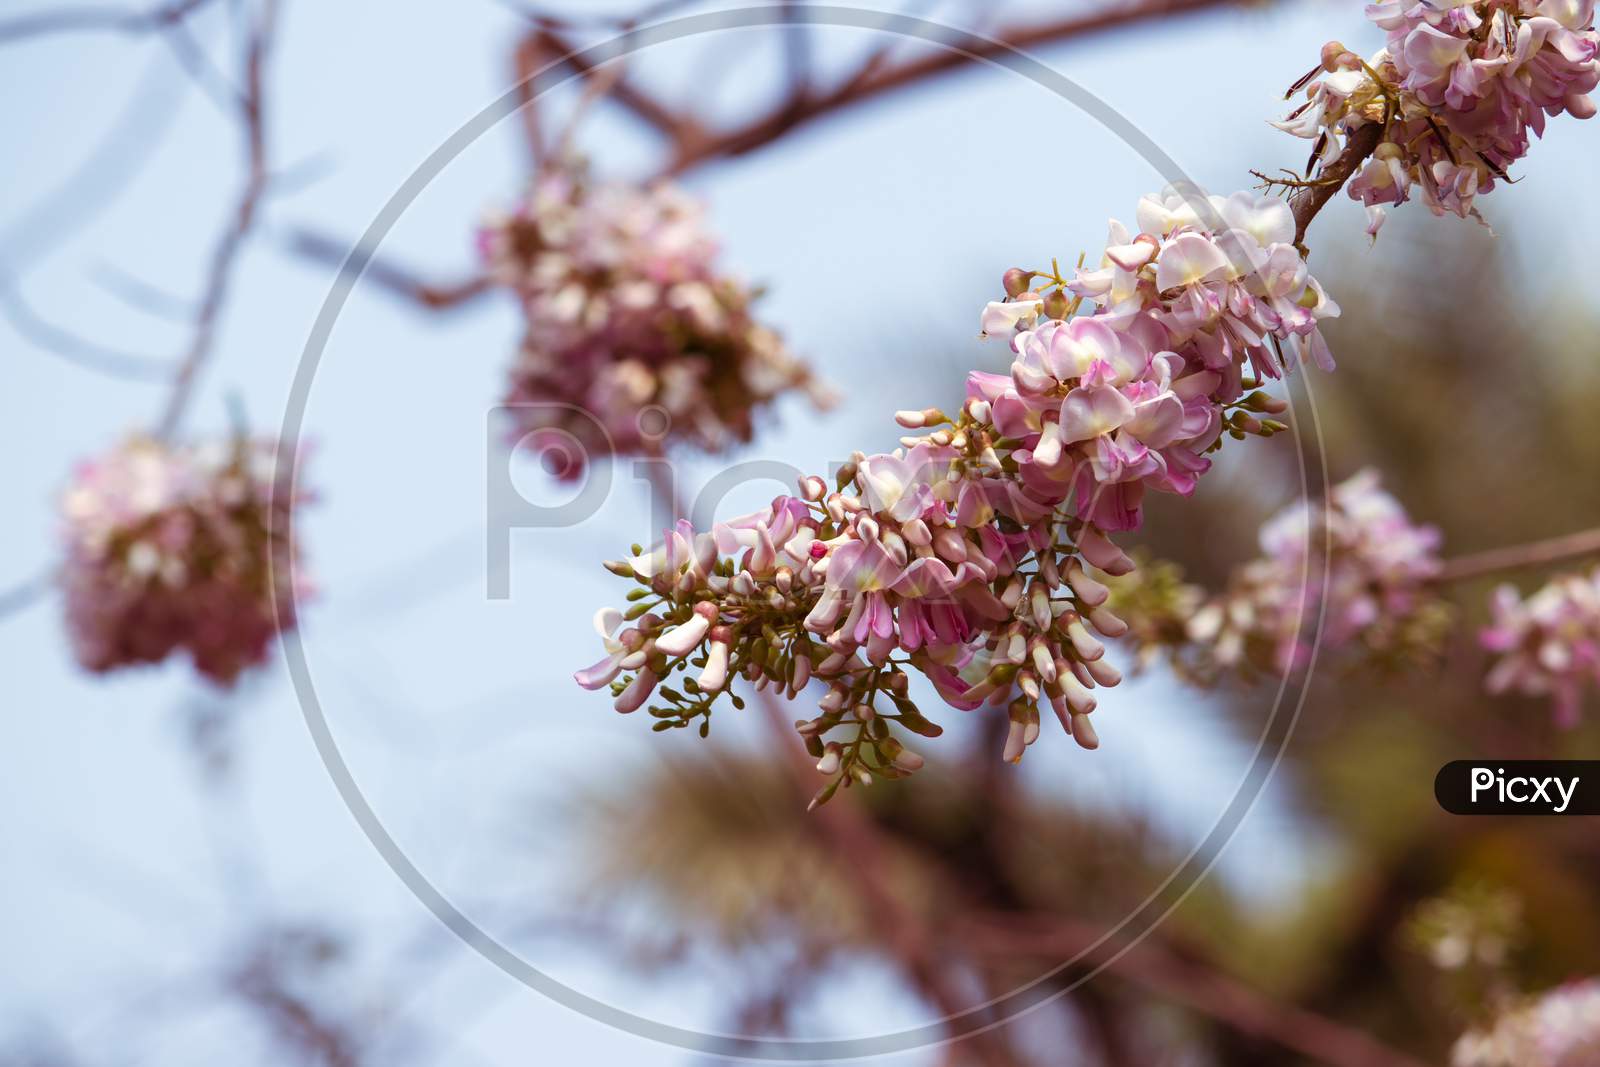 Bunch Of Gliricidia Sepium Flowers Or Quick Stick Flowers With Selective Focus, Perfect For Wallpaper